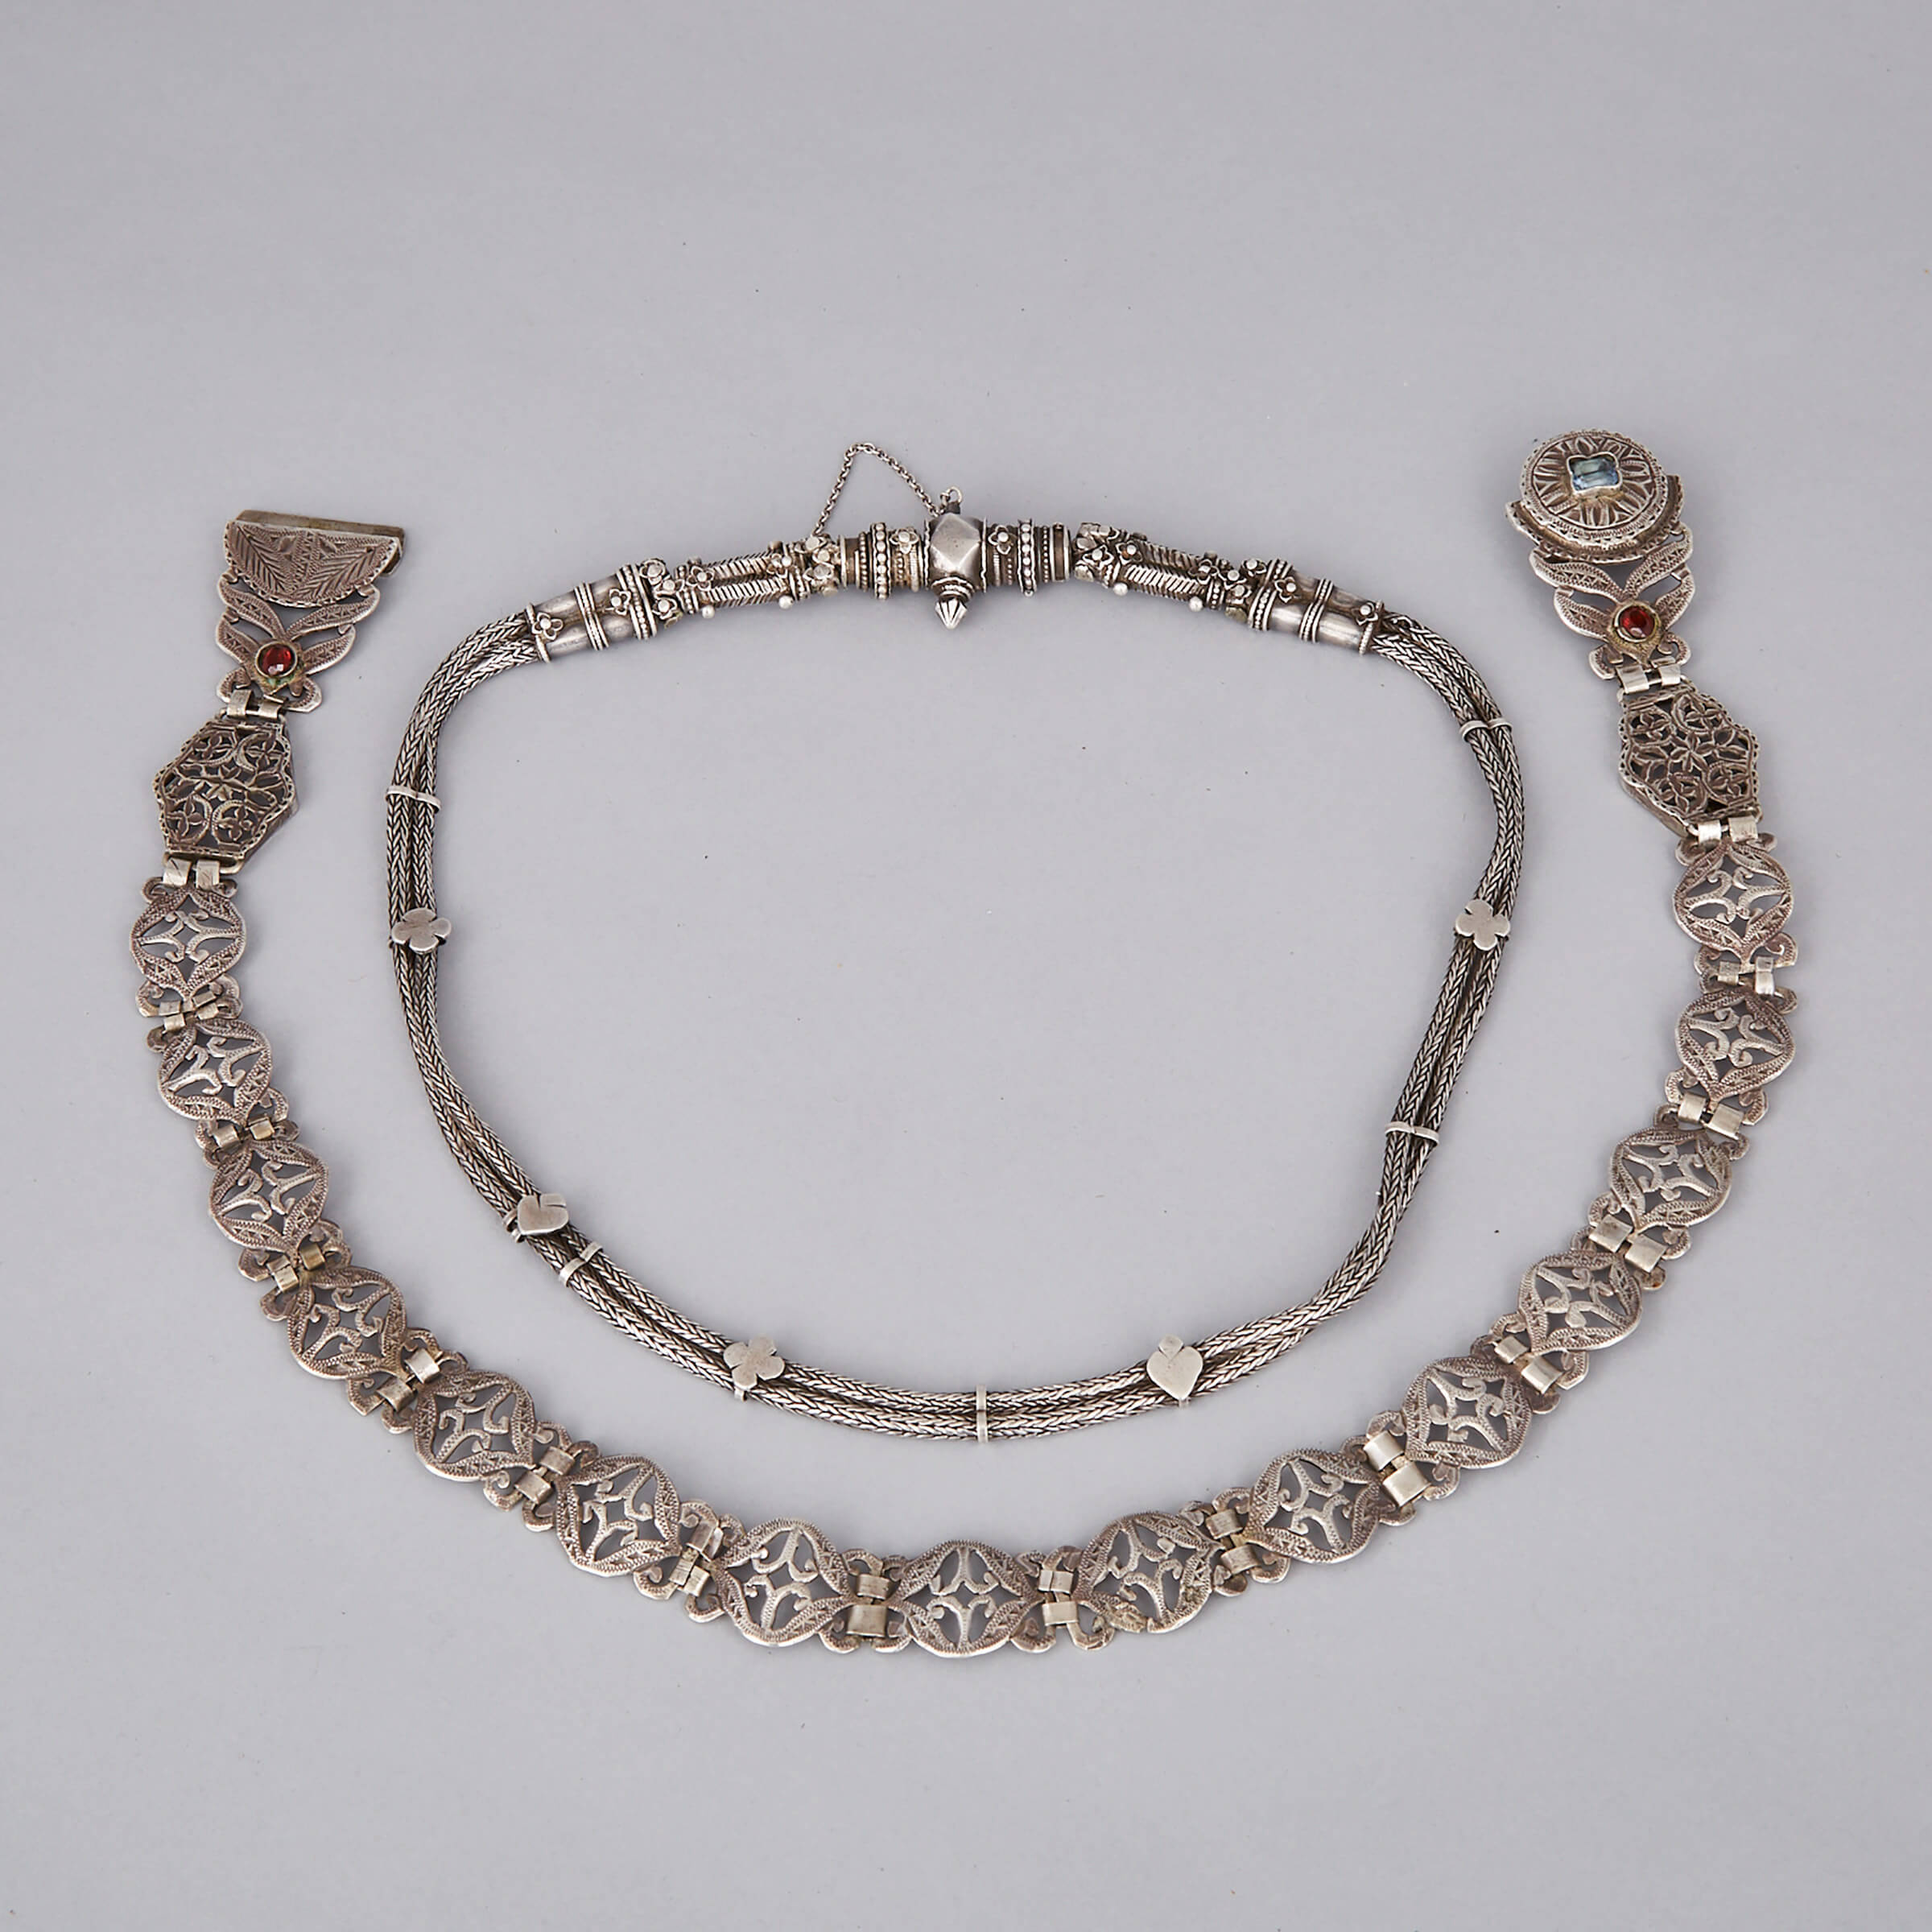 Two Middle Eastern Silver Belts, late 19th/early 20th century